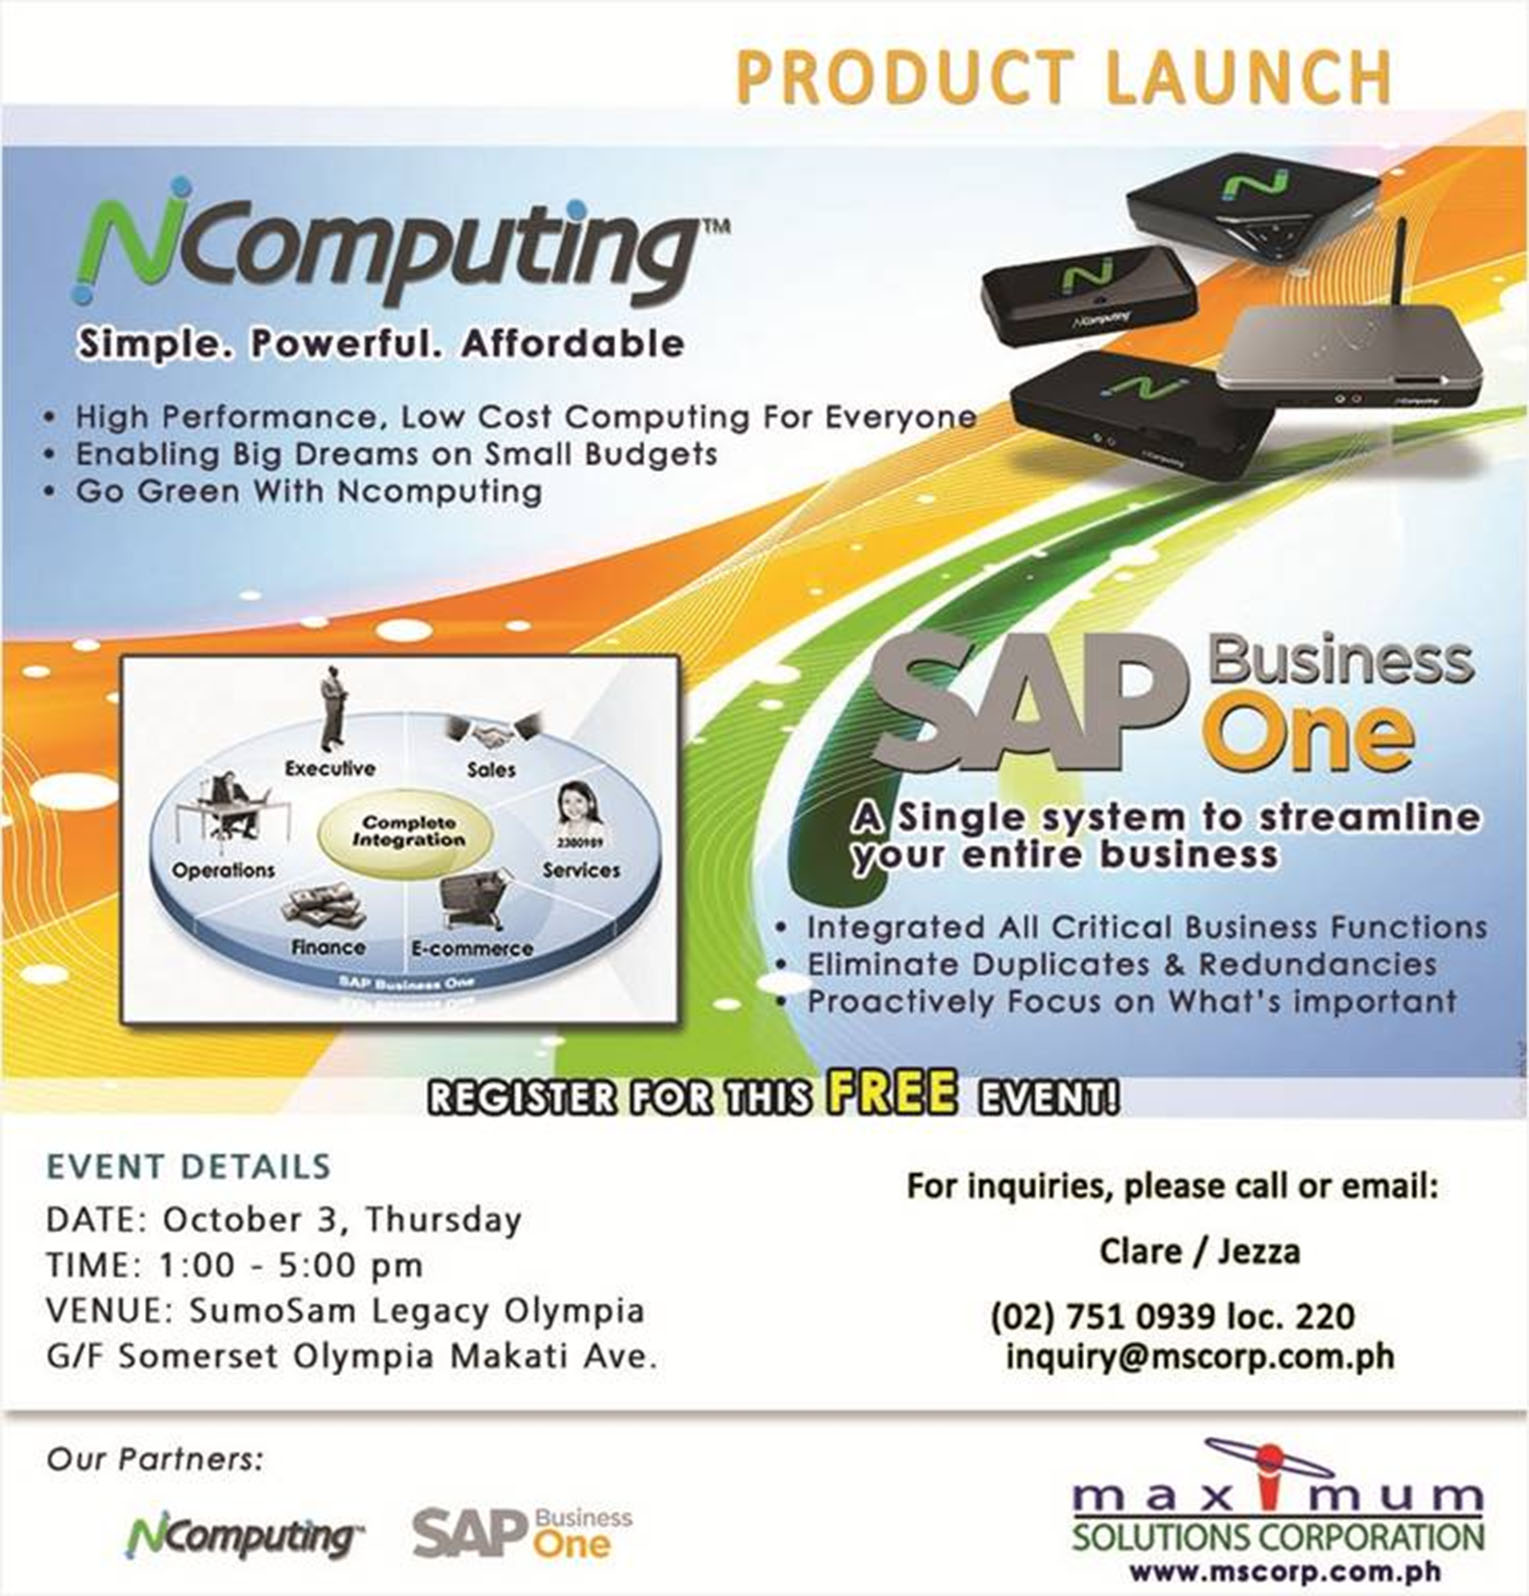 NComputing and SAP Business One Product Launch